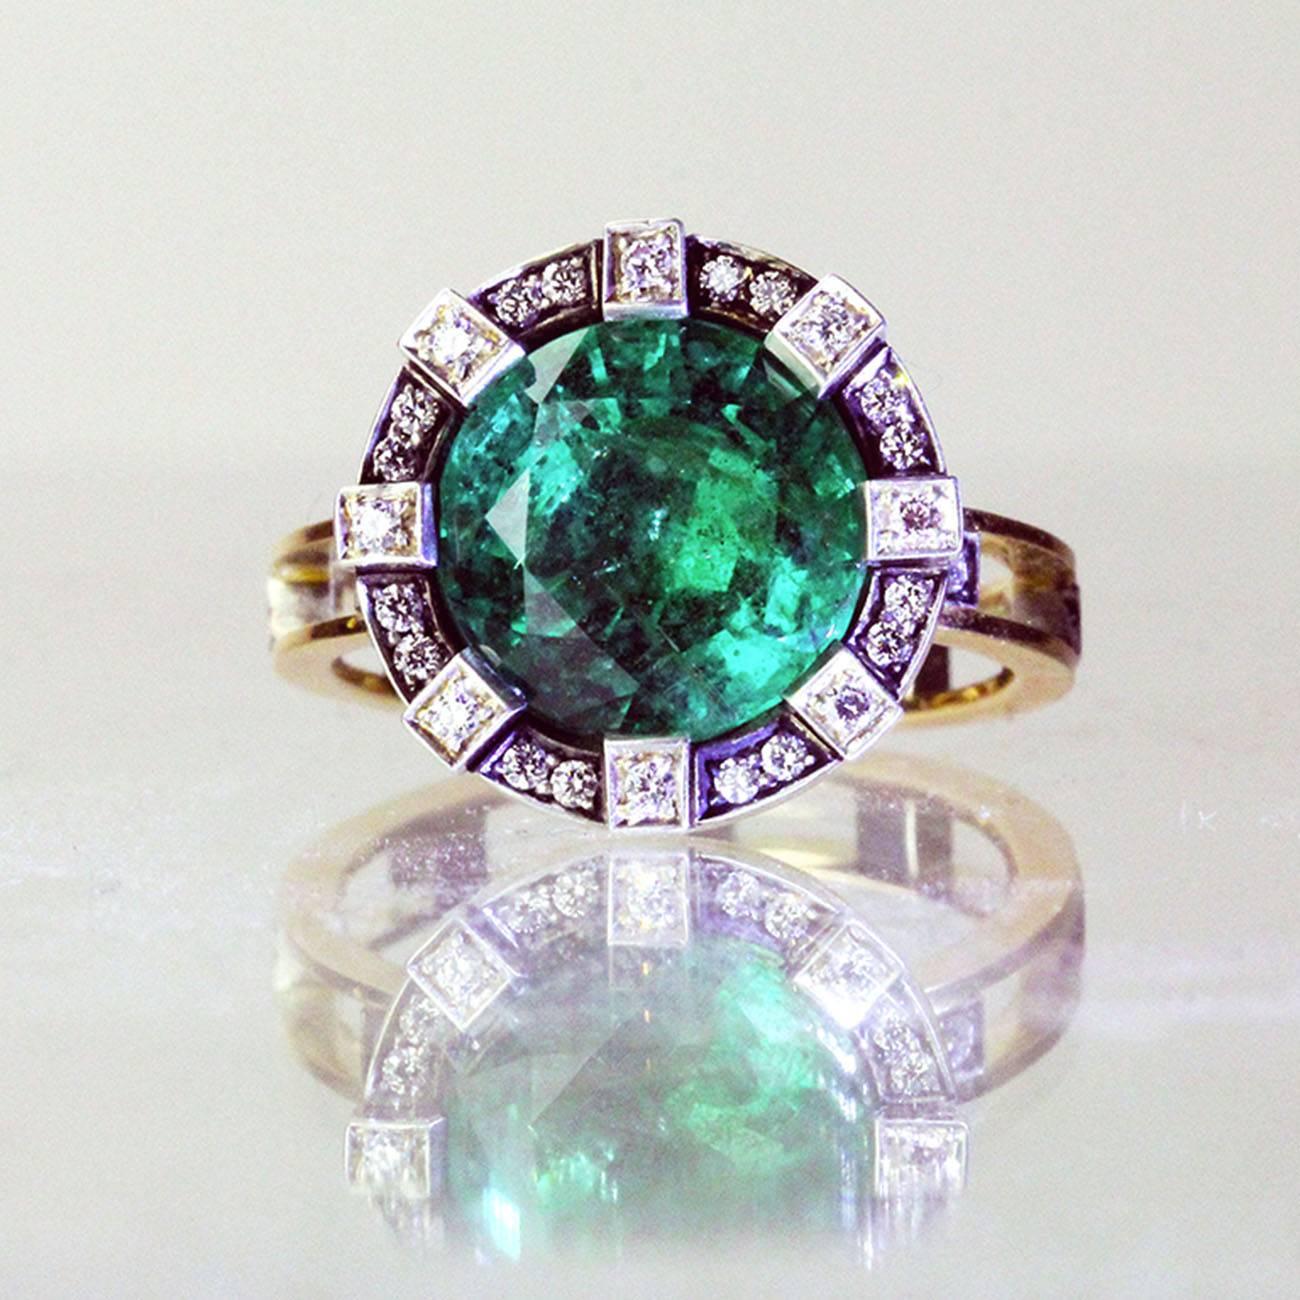 The ring has a spectacular untreated emerald of 4.73 carats (accompanied by the corresponding GIA certificate) that is set in a three dimensional diamond studded setting.  The basket holding the stone allows the light to reflect from below and